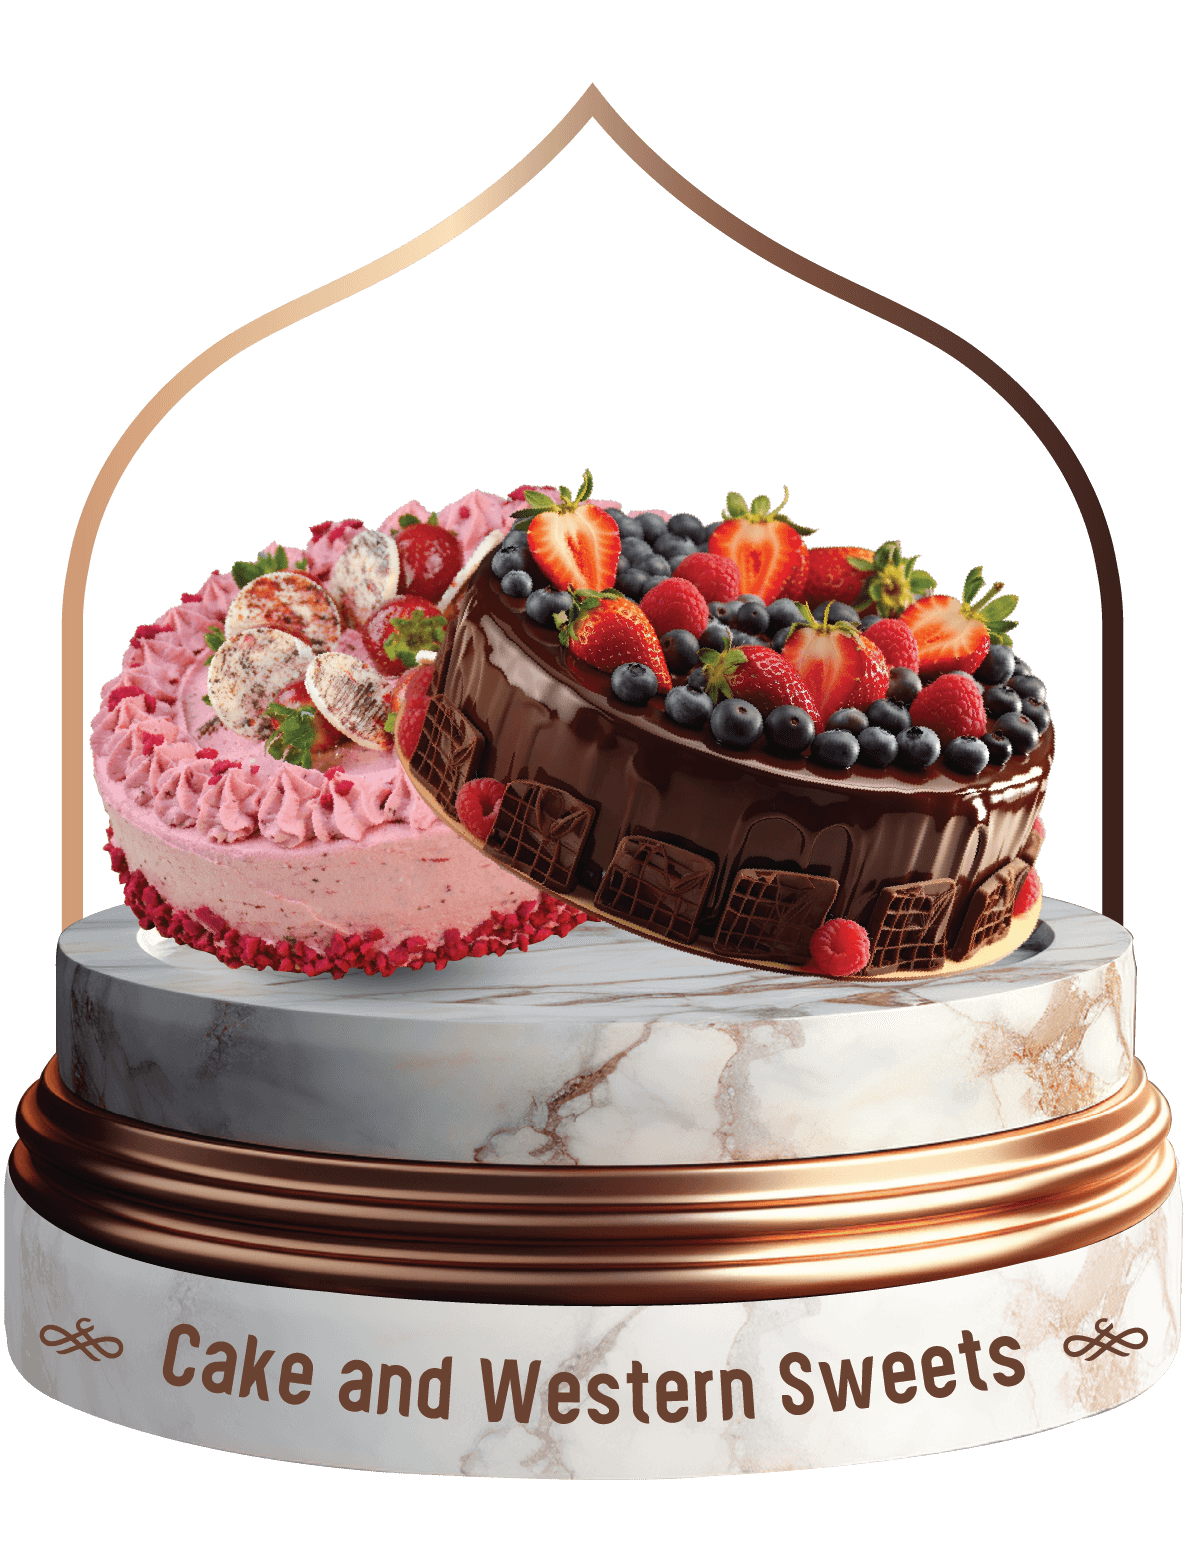 Cakes and Western Sweets